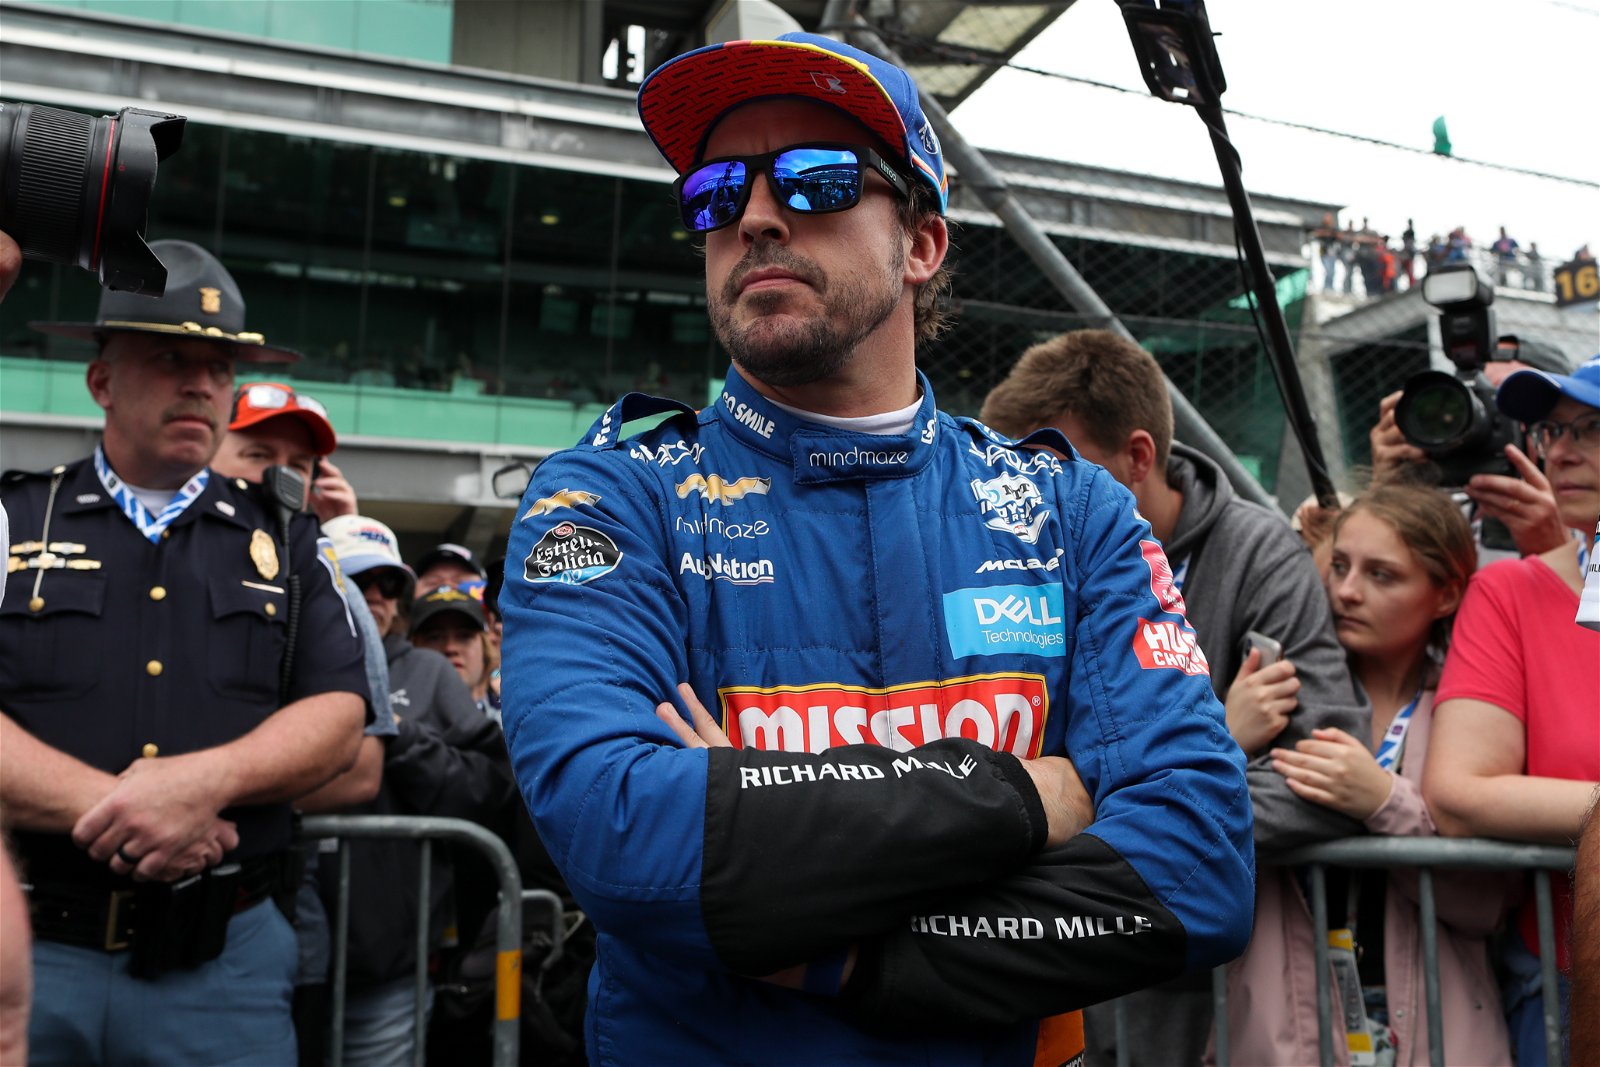 Fernando Alonso failed to qualify for the Indianapolis 500